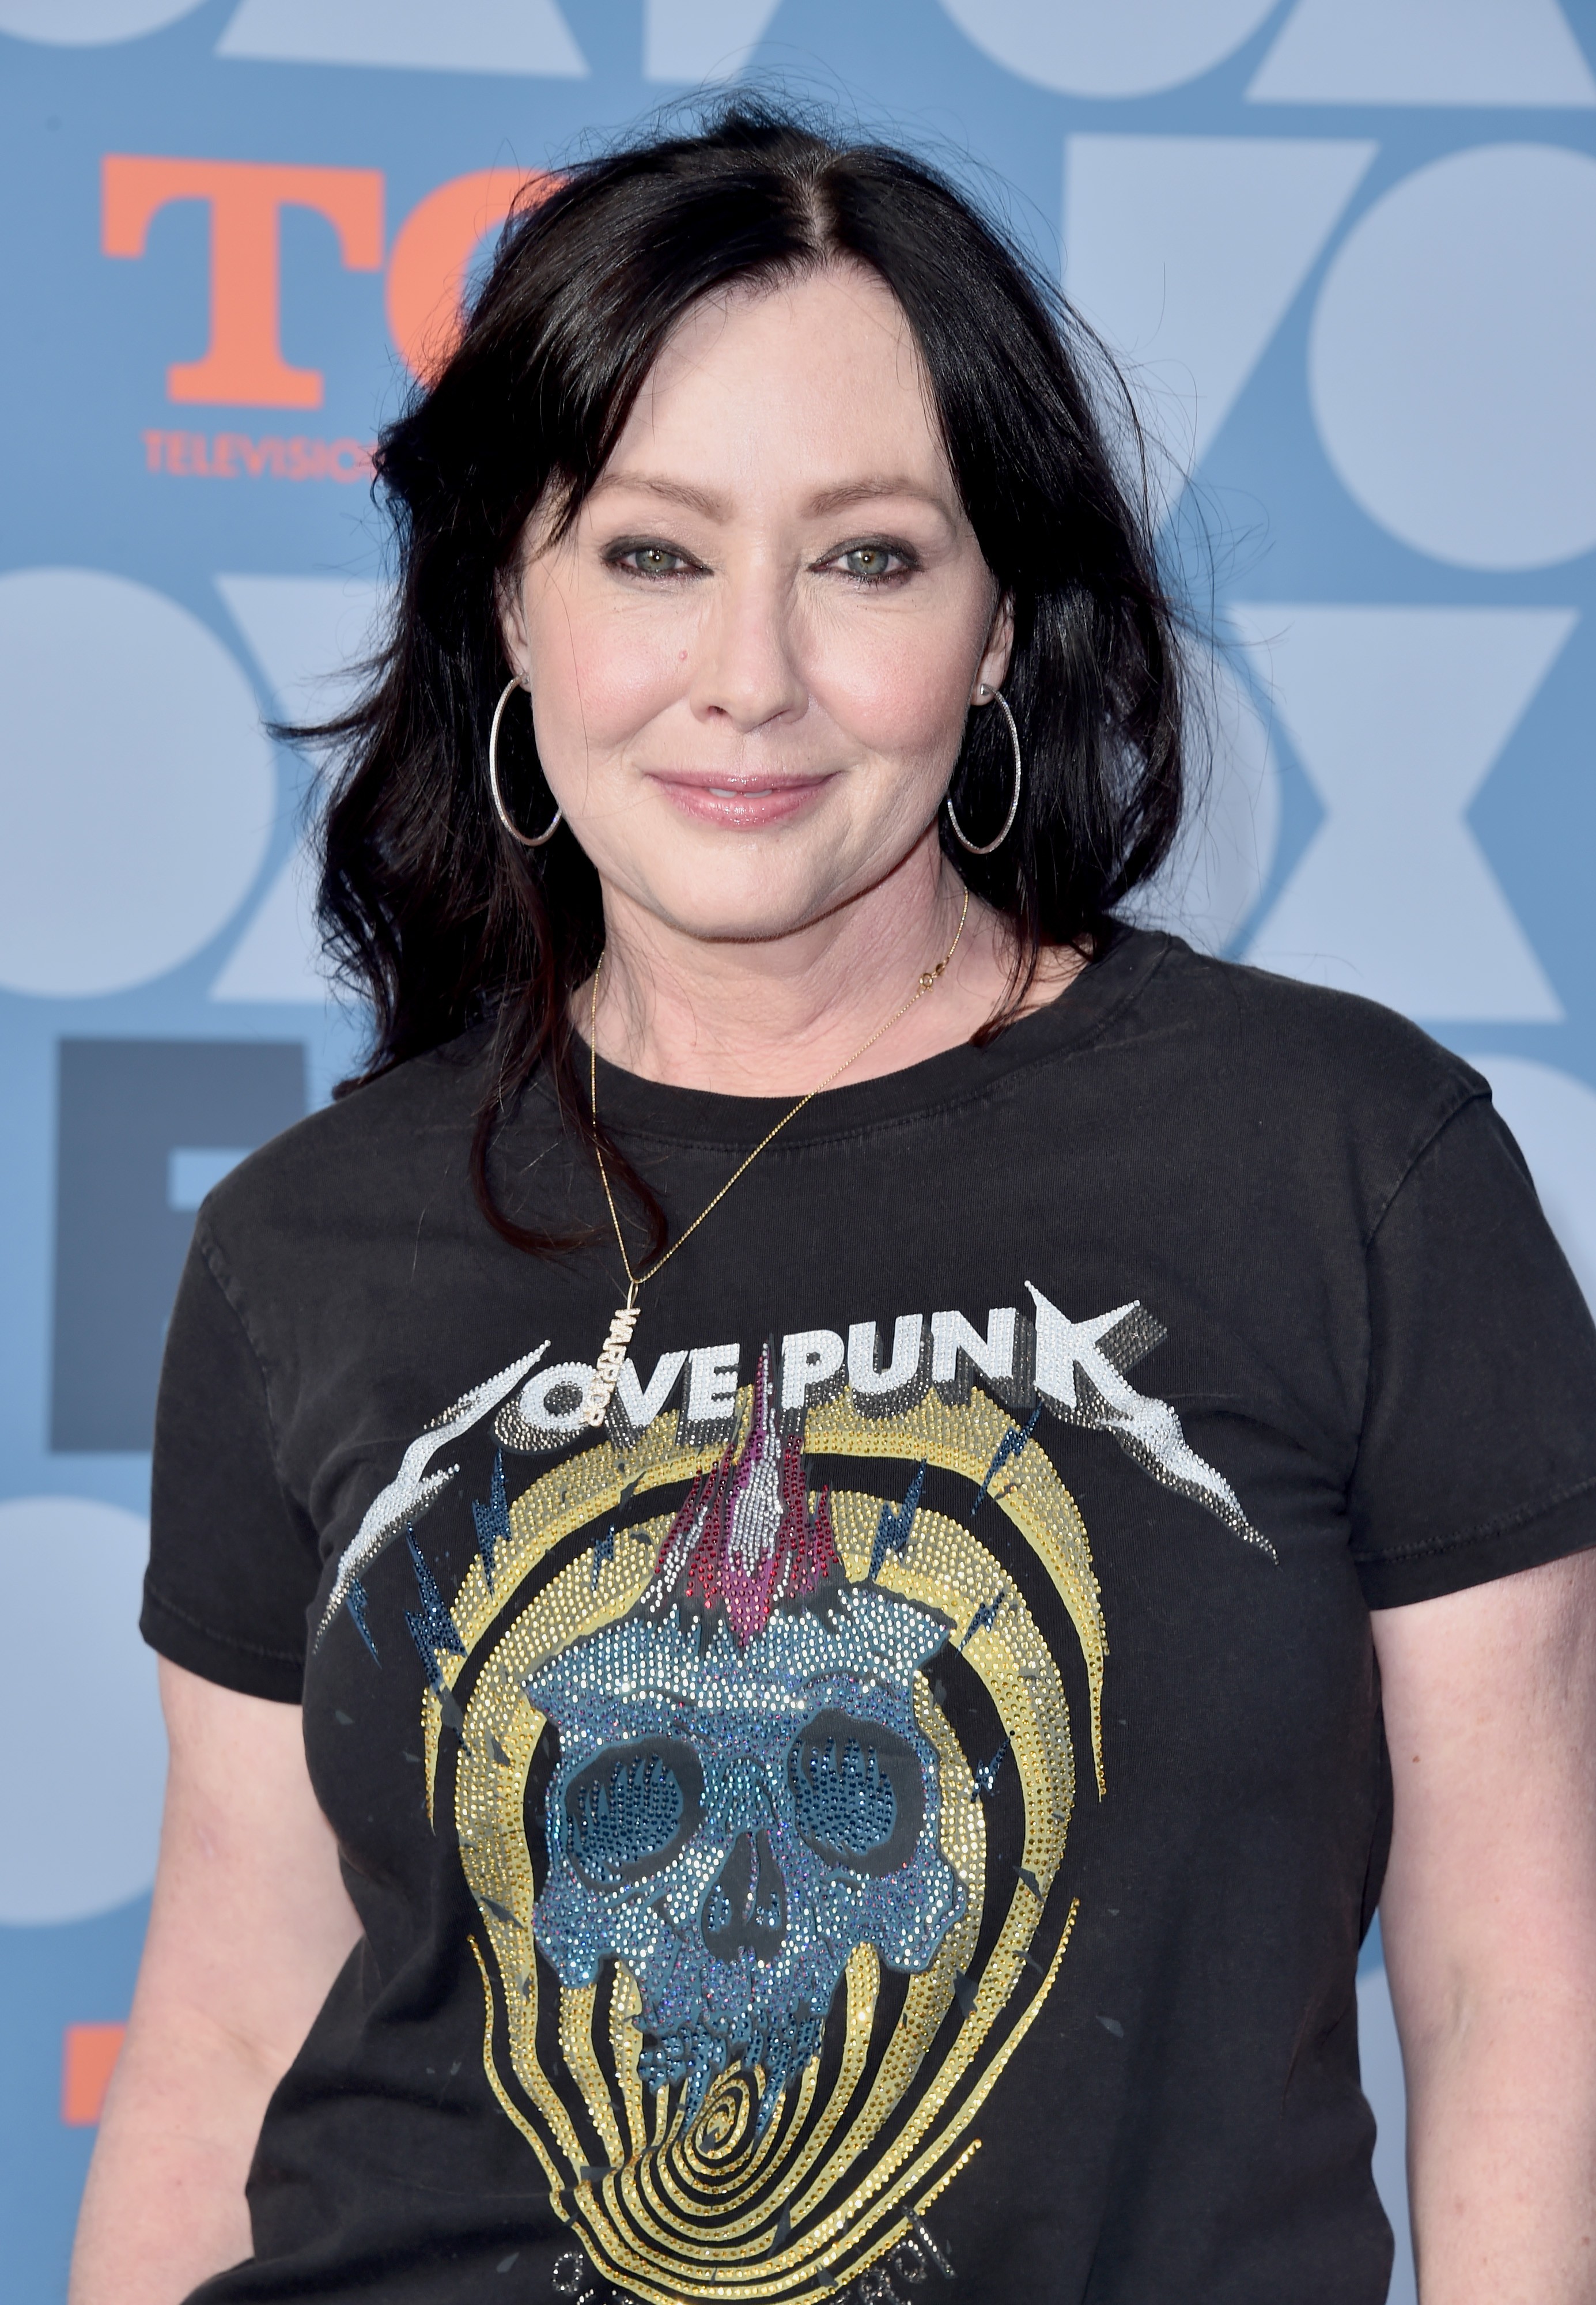 Shannen Doherty ‘fighting to stay alive’ as she shares update from cancer battle